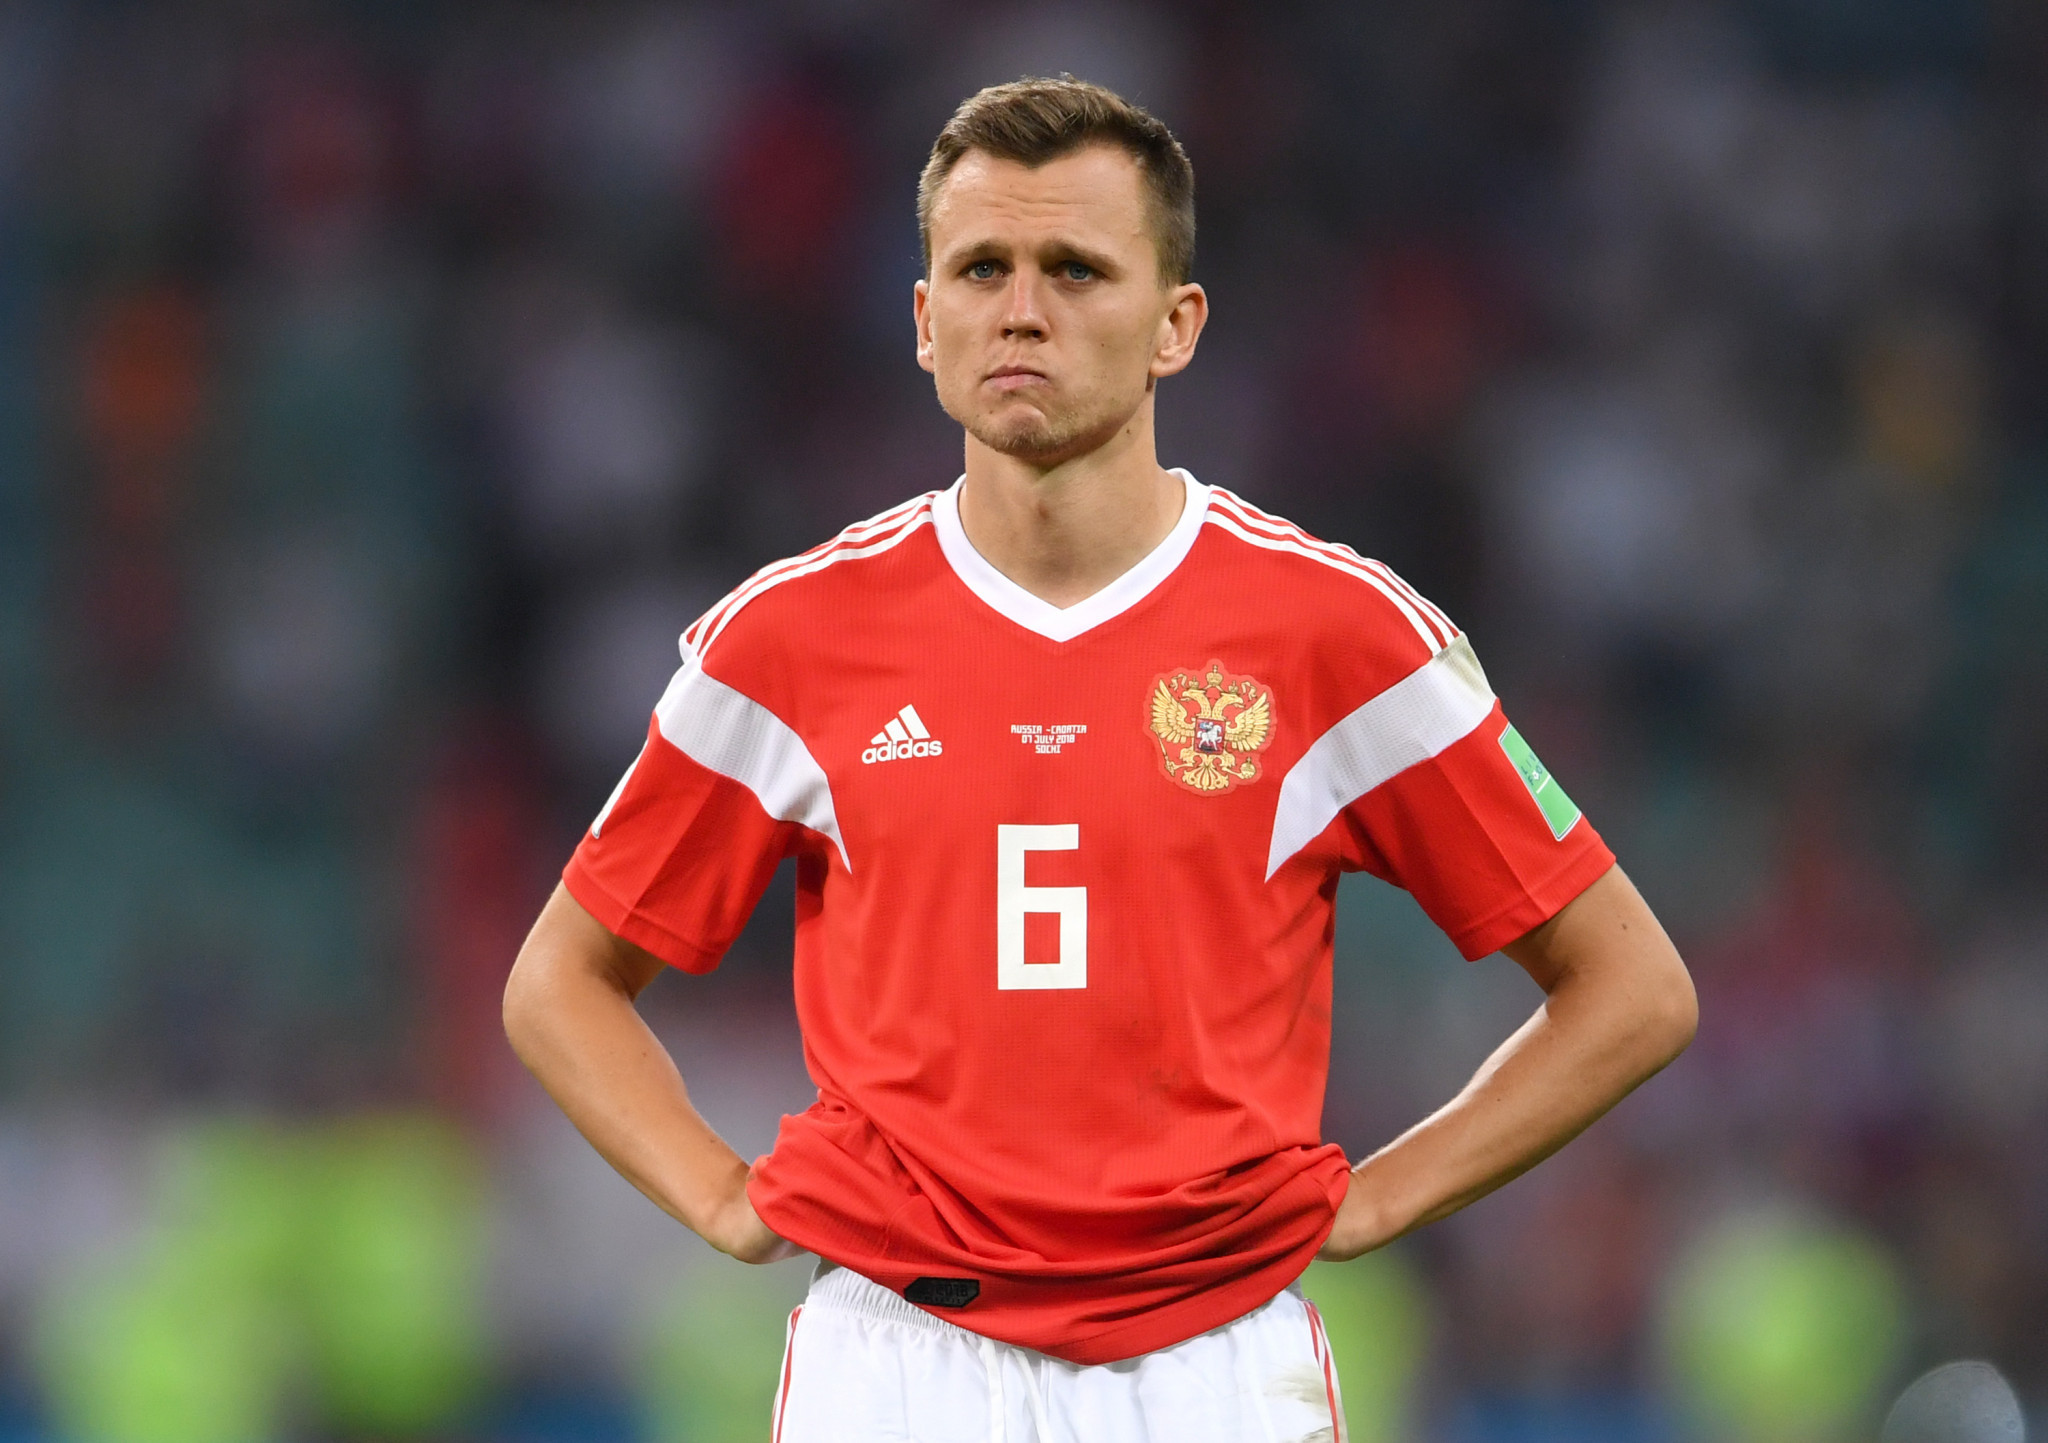 Cheryshev cleared of wrongdoing as Spanish Anti-Doping Agency close injection investigation